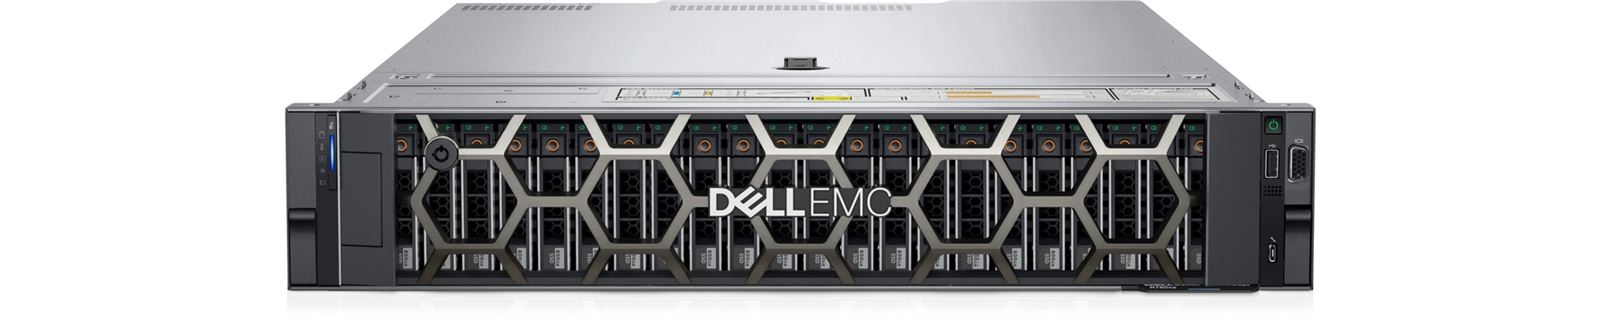 Dell PowerEdge R750xs Chassis 8 x 3.5 (Hotplug)/ Xeon E-4310 - 2.1GHz (12-core)/120W/ 16GB